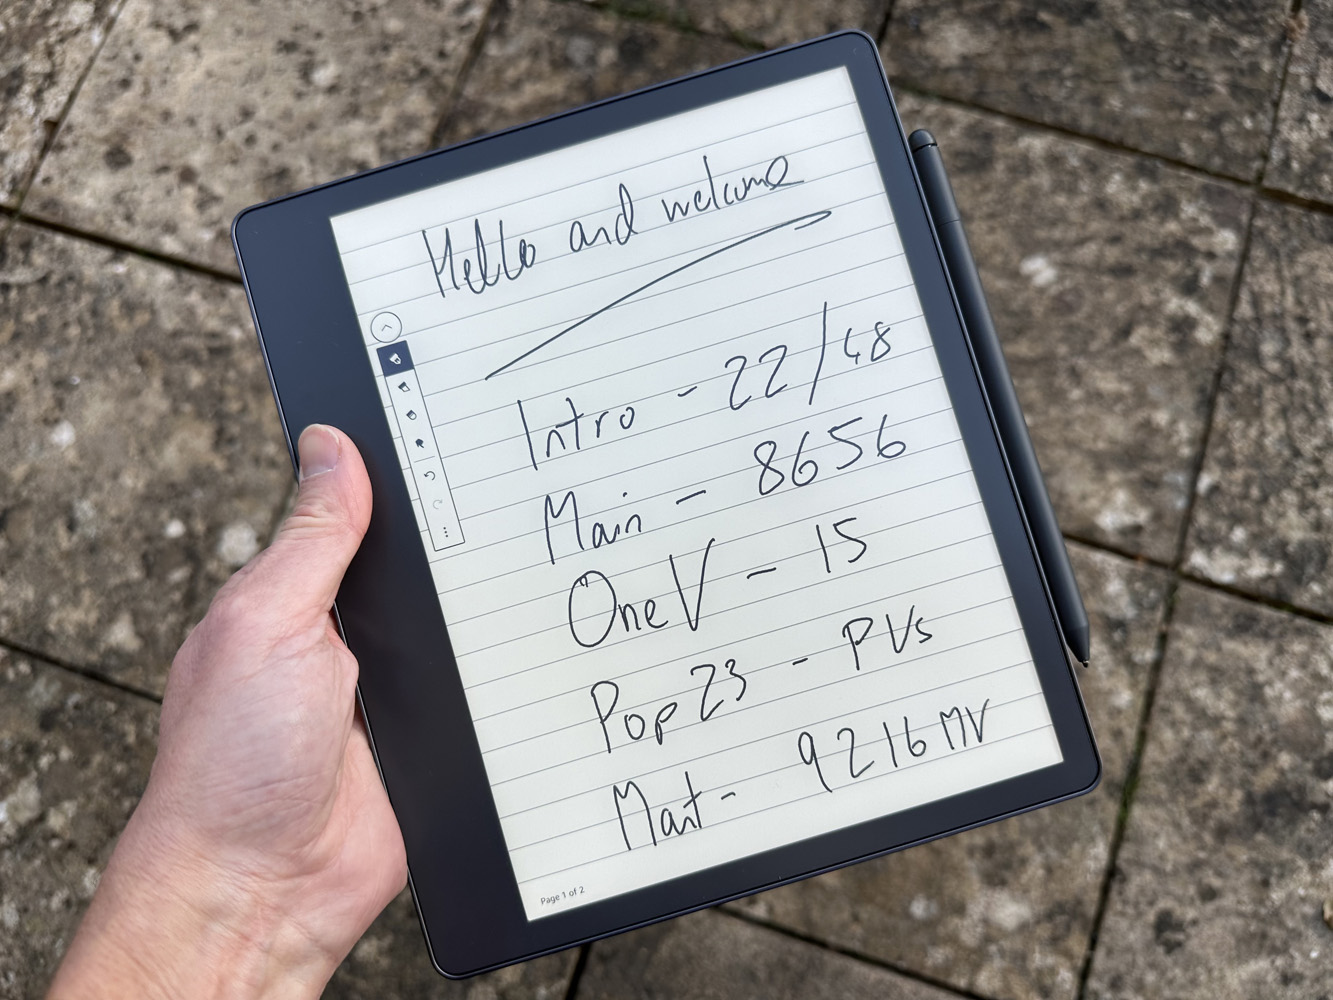 Kindle Scribe review: Write on